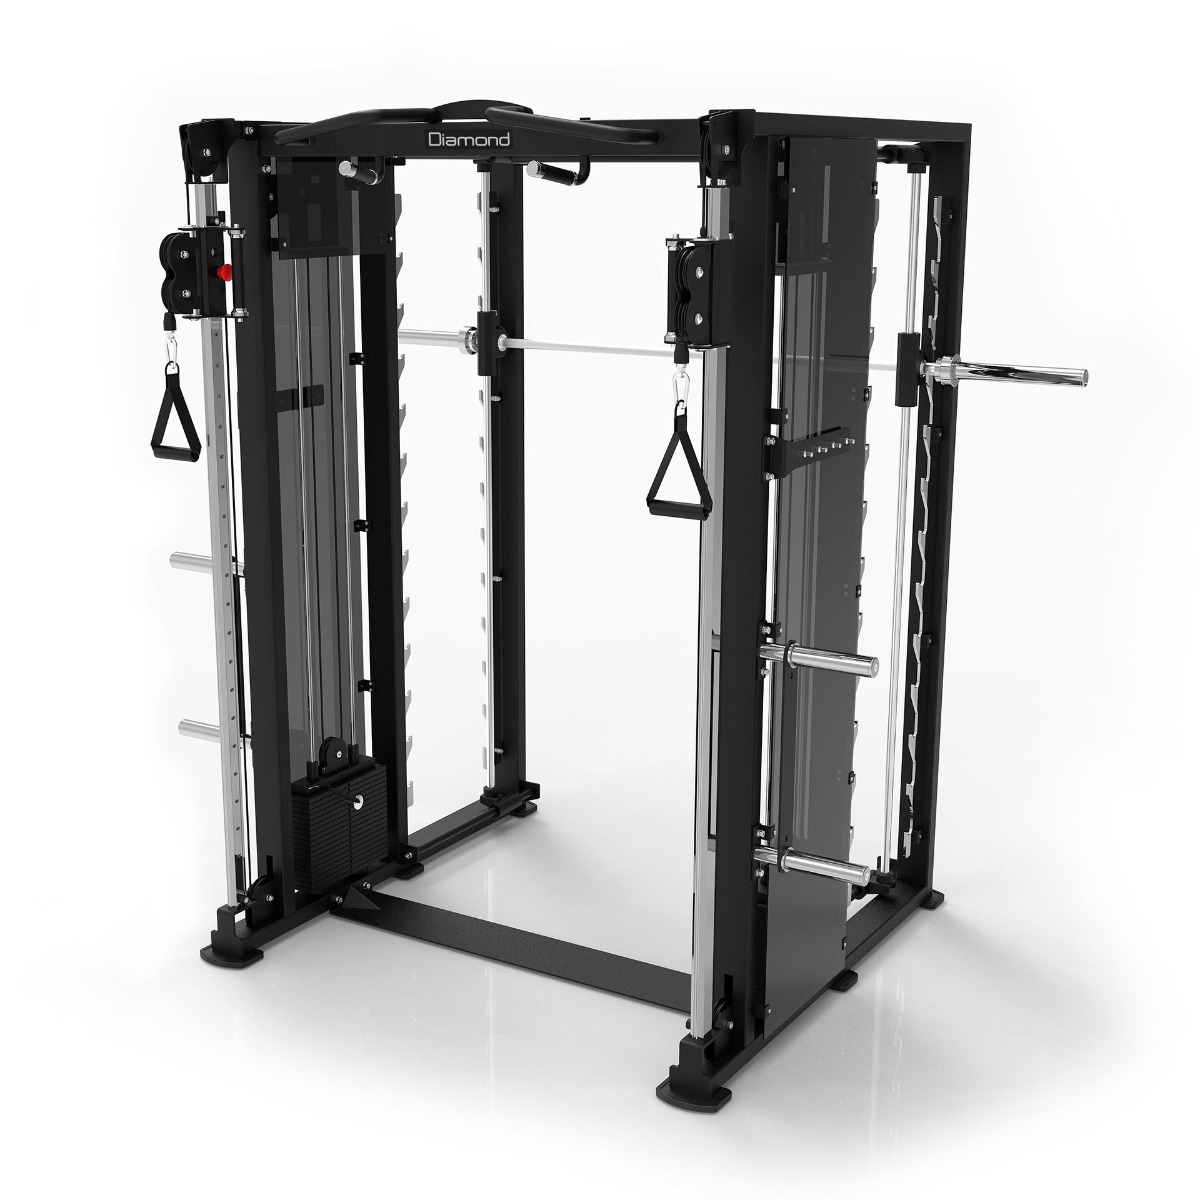 All in One Station -  Linea Diamond - Weight stack 90 kg x 2 